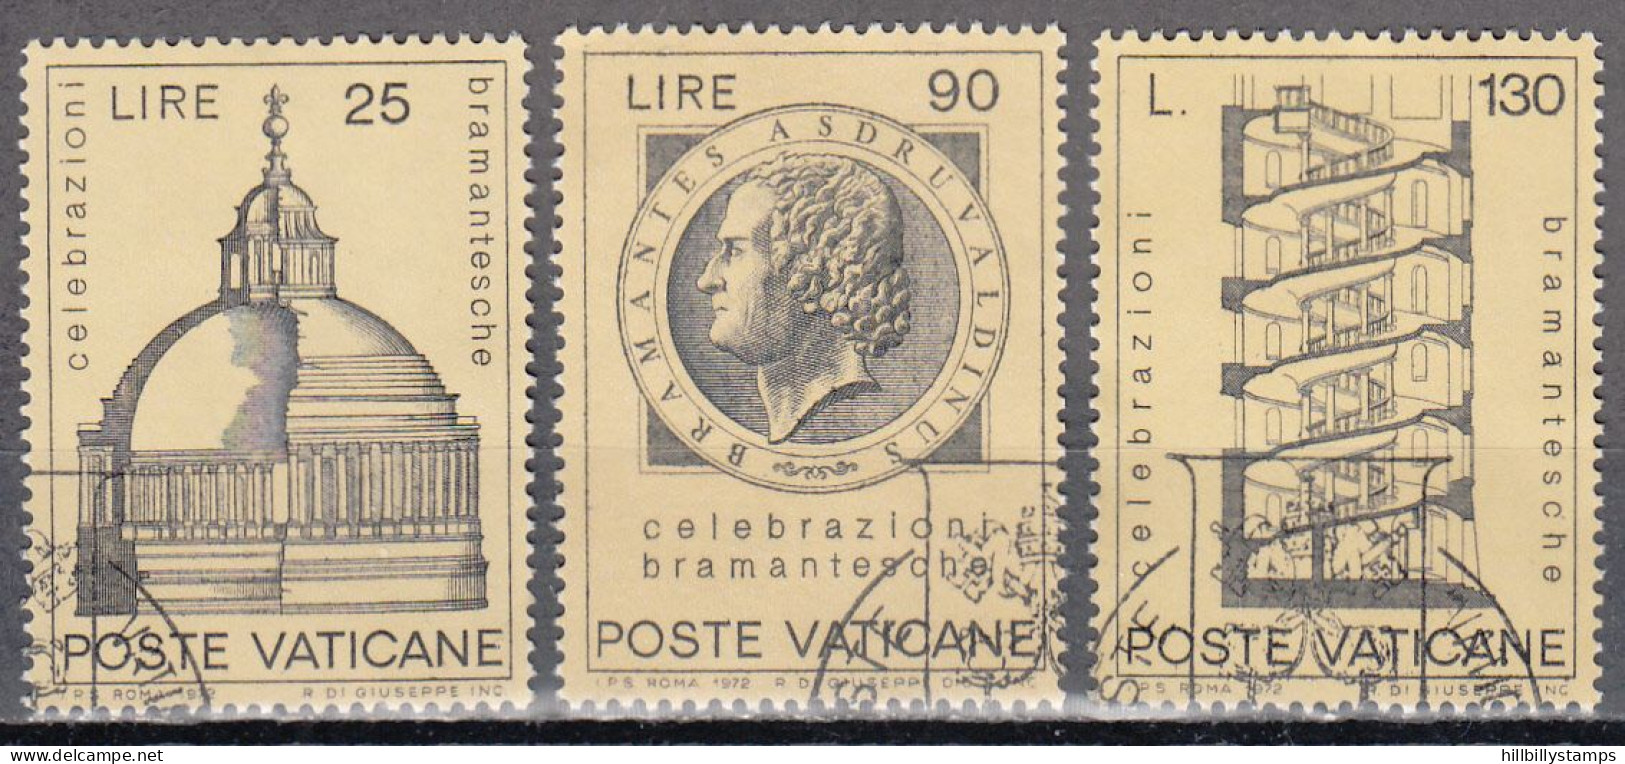 VATICAN   SCOTT NO 515-17   USED   YEAR  1972 - Used Stamps